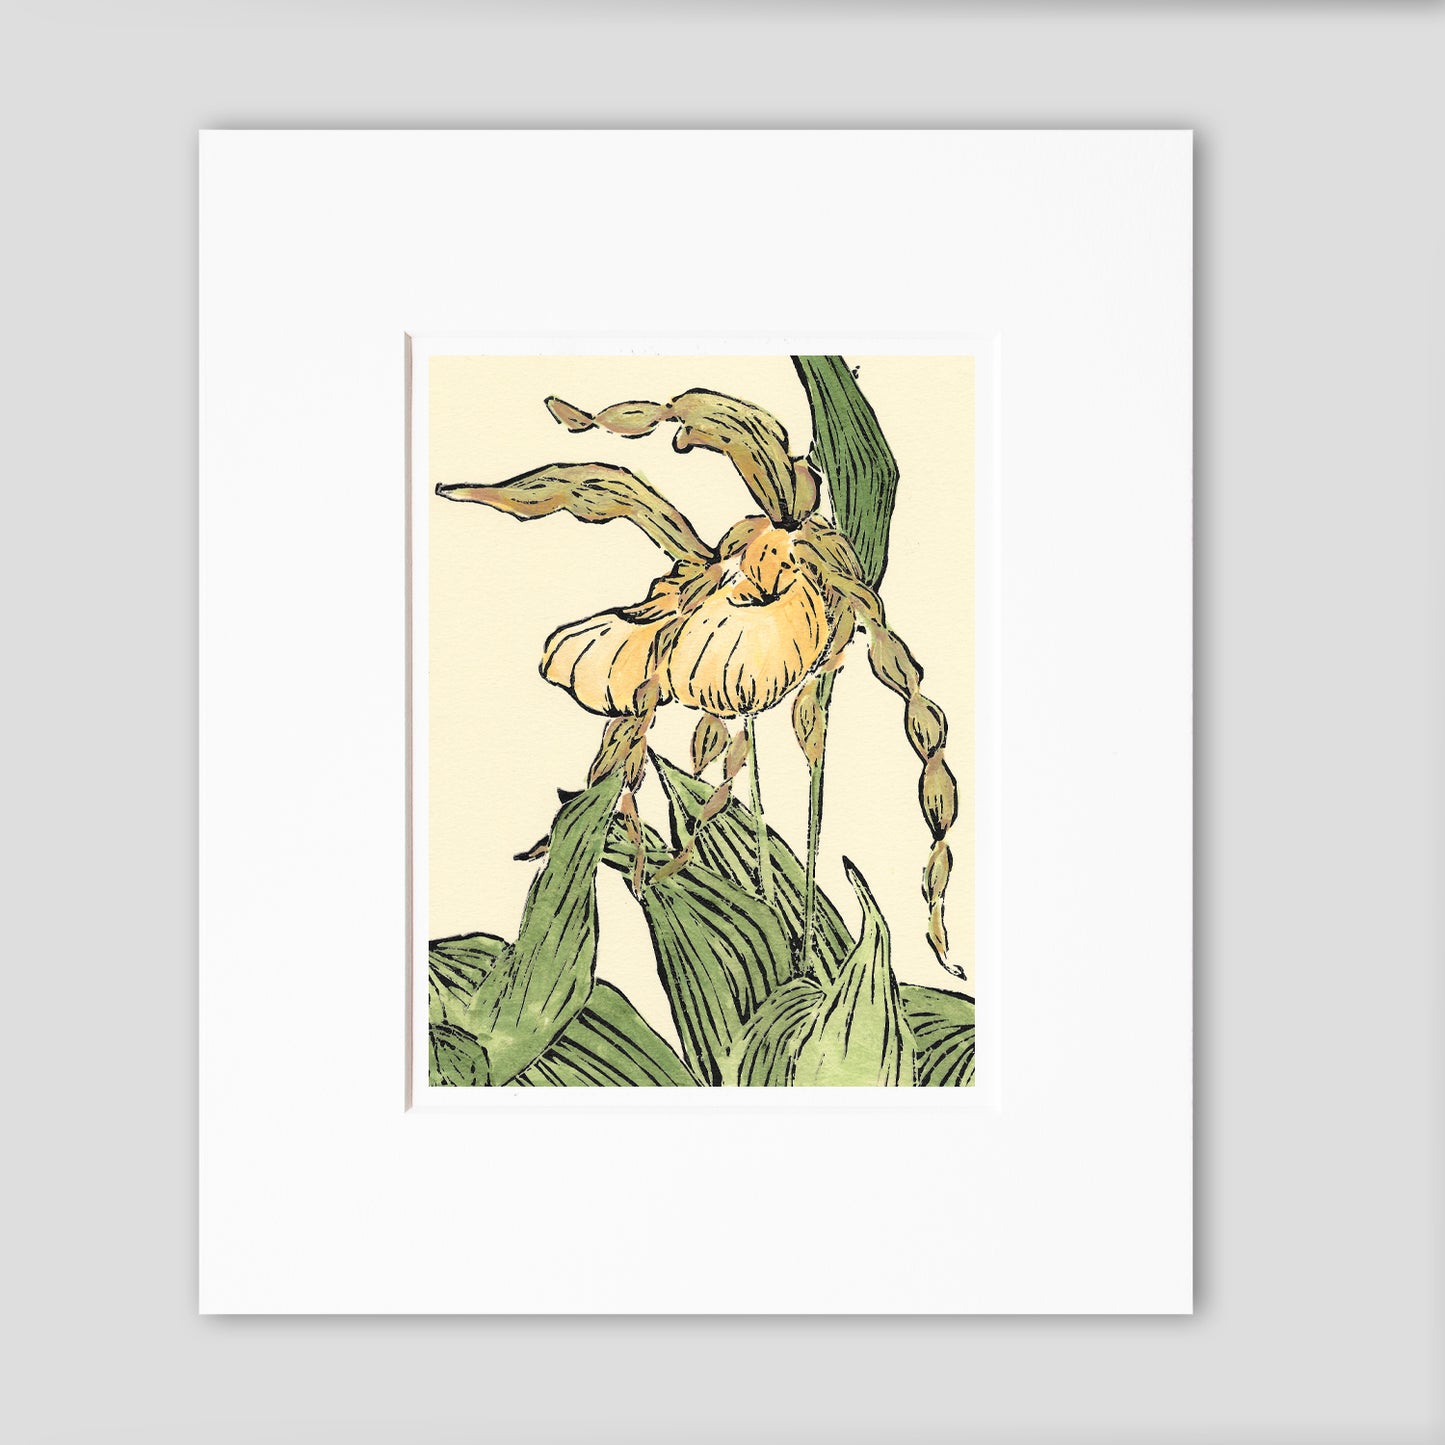 Flower art titled Lady Slipper Pair, a multicolor linoleum block print of one of Michigan's most delightful native orchid wildflowers by Natalia Wohletz of Peninsula Prints, Milford & Mackinac Island.